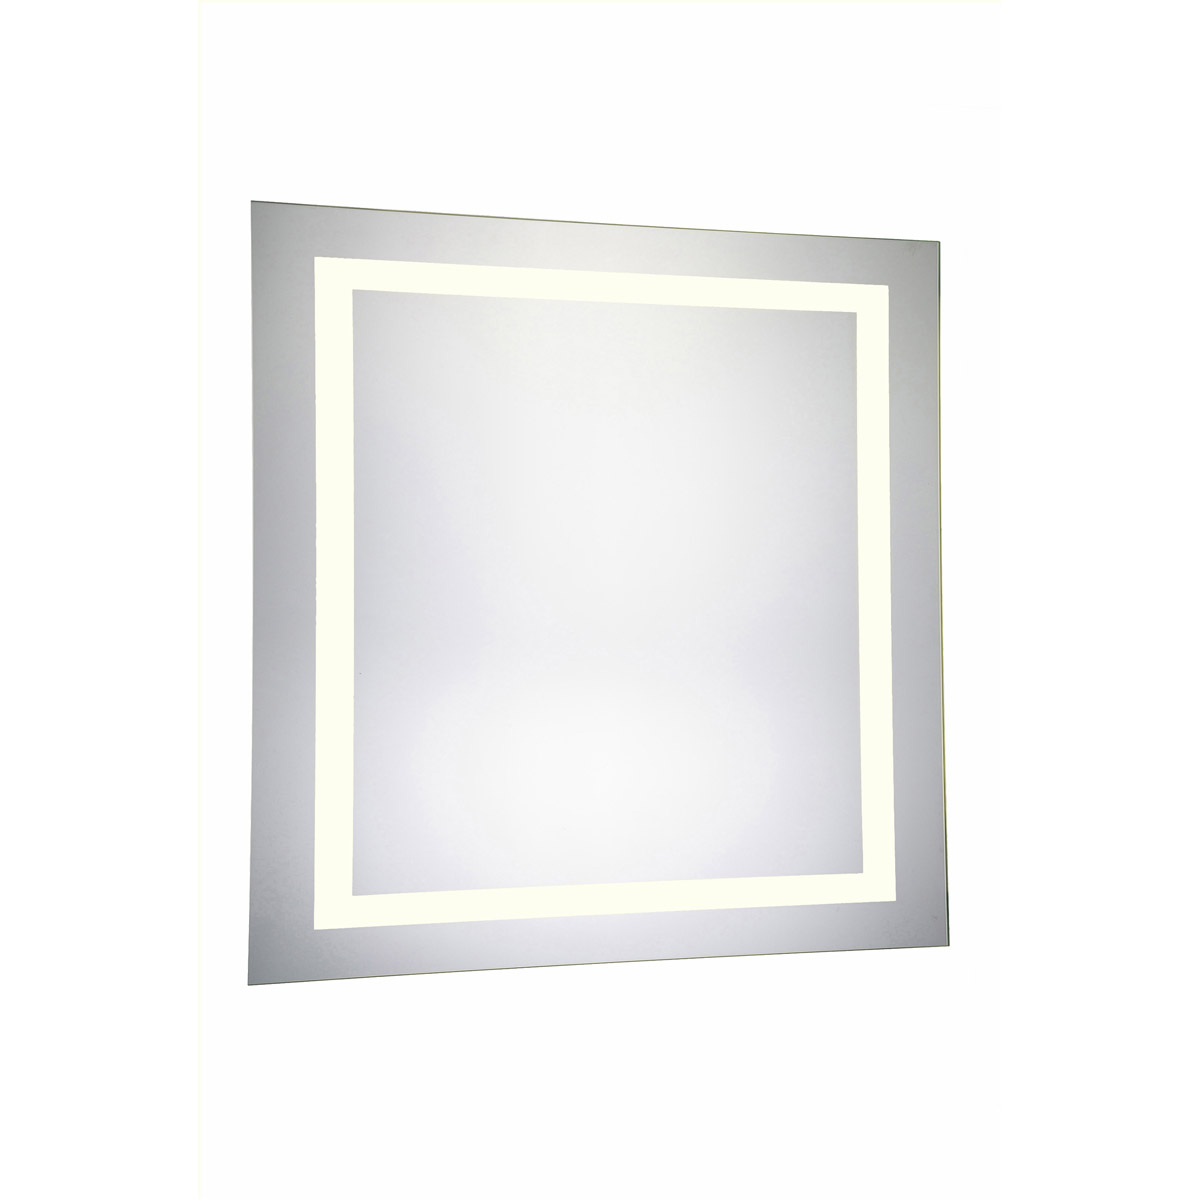 4 Sides Led Electric Mirror Rectangle Dimmable 3000k - 36 X 36 In.